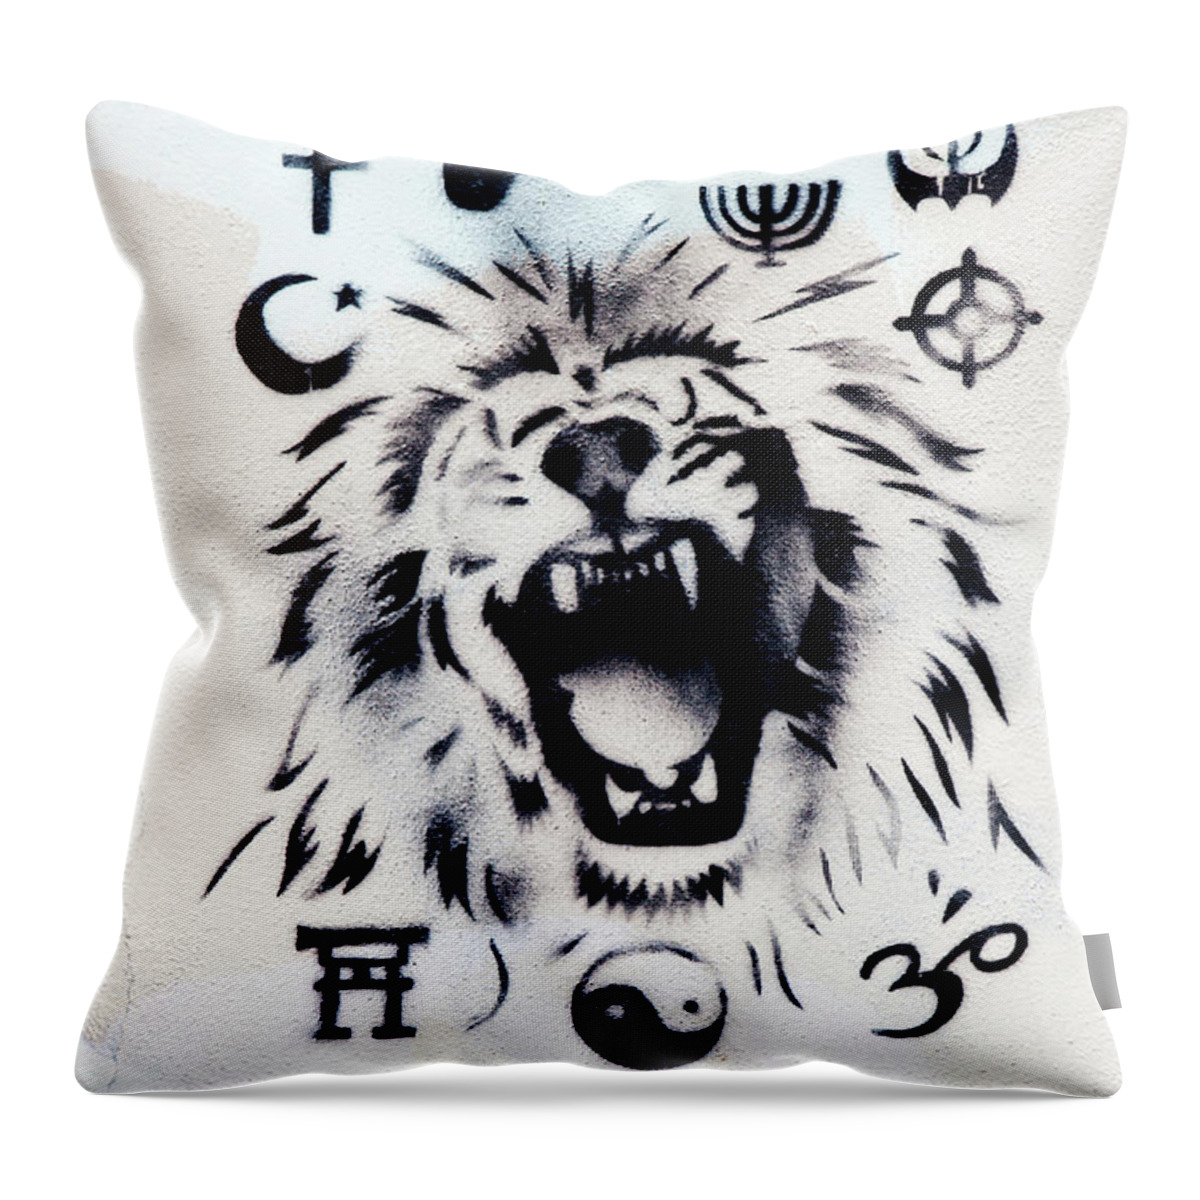 Grafitti Throw Pillow featuring the photograph Who Do You Believe by Art Block Collections